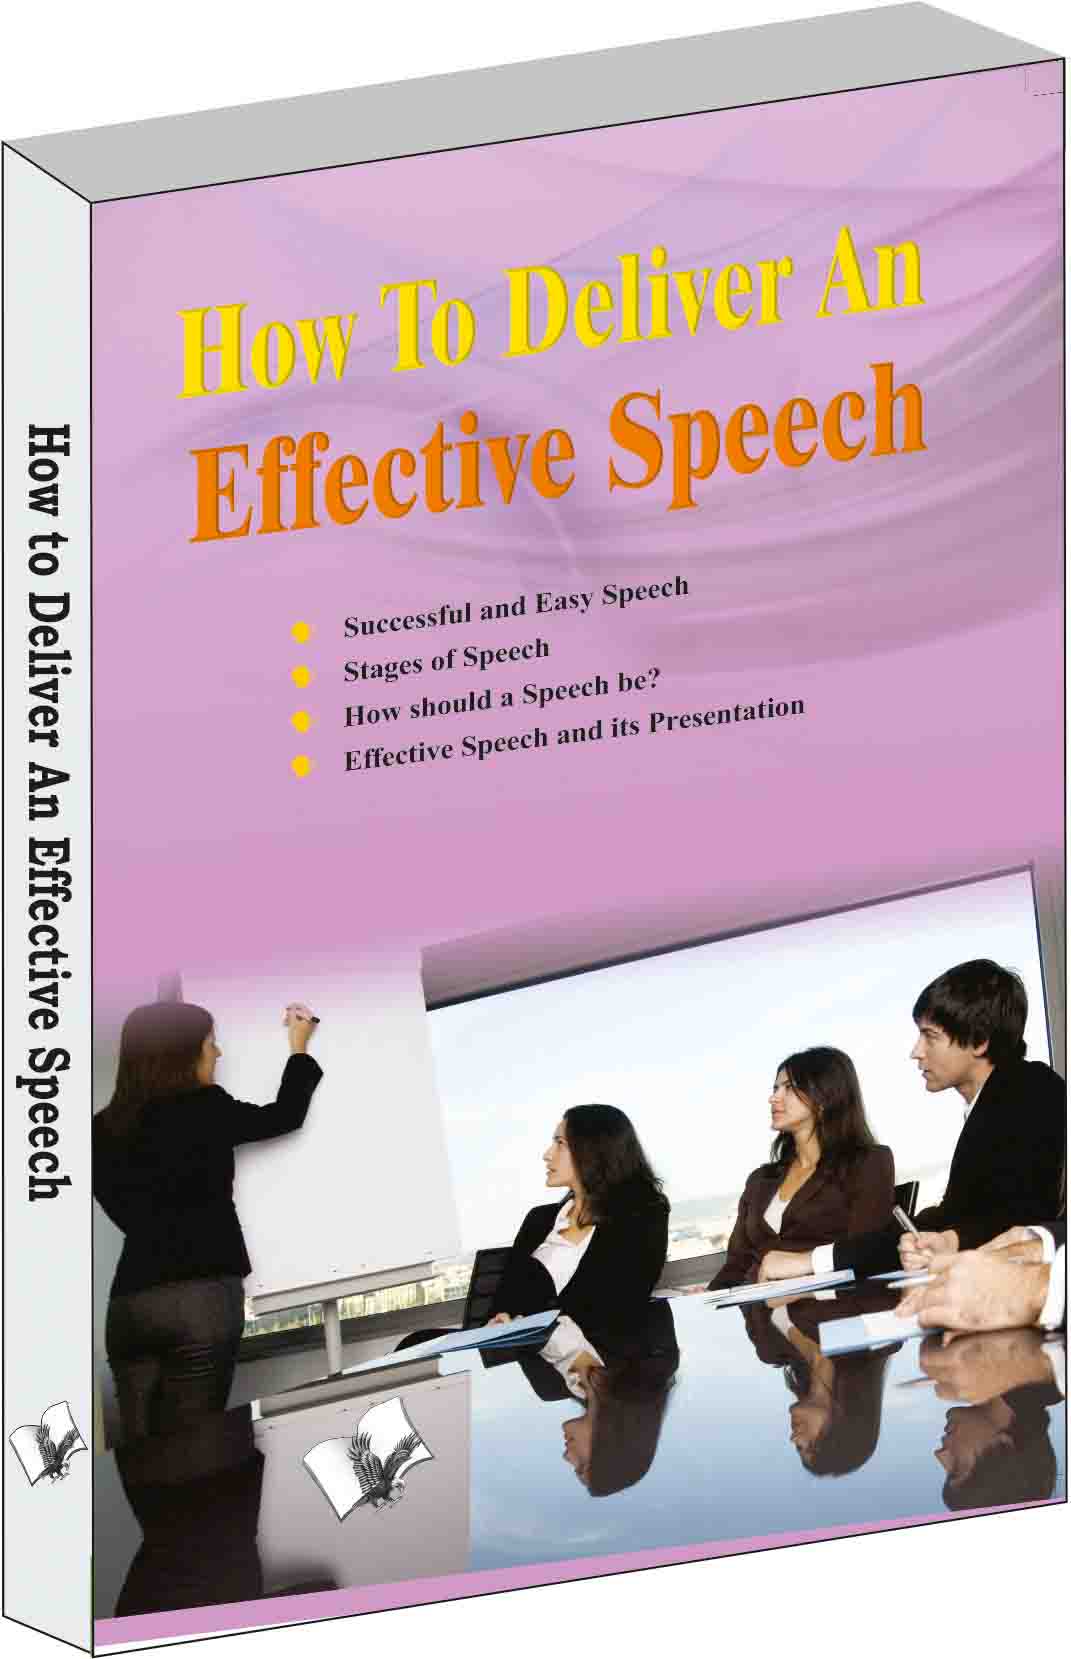 How to Deliver an Effective Speech-Speak and speak before a mirror